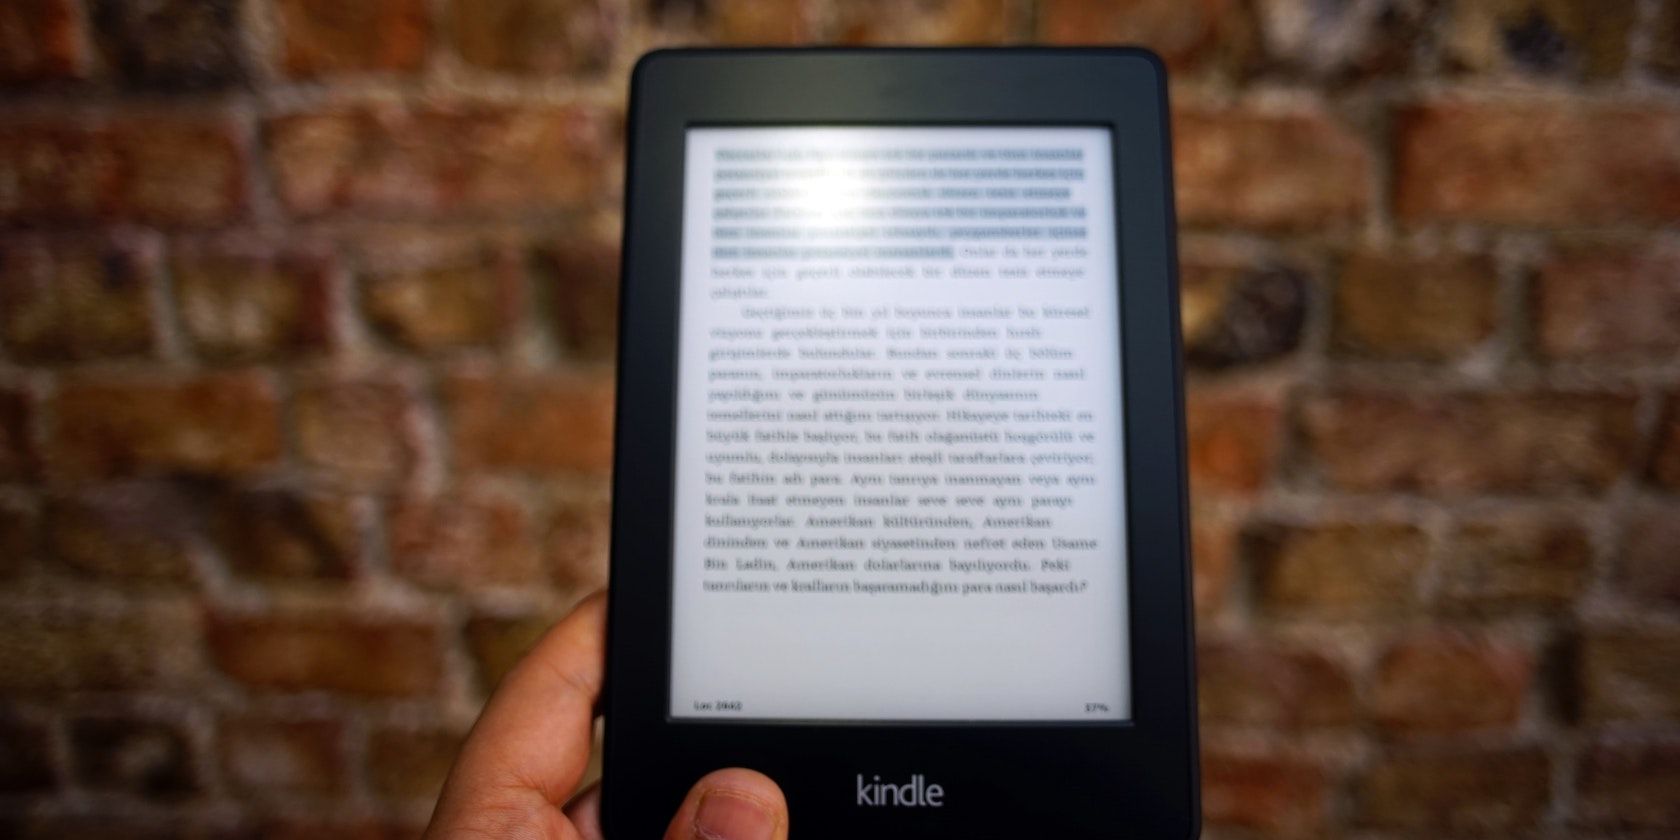 A hand holding a Kindle in the foreground with a brick wall in the background